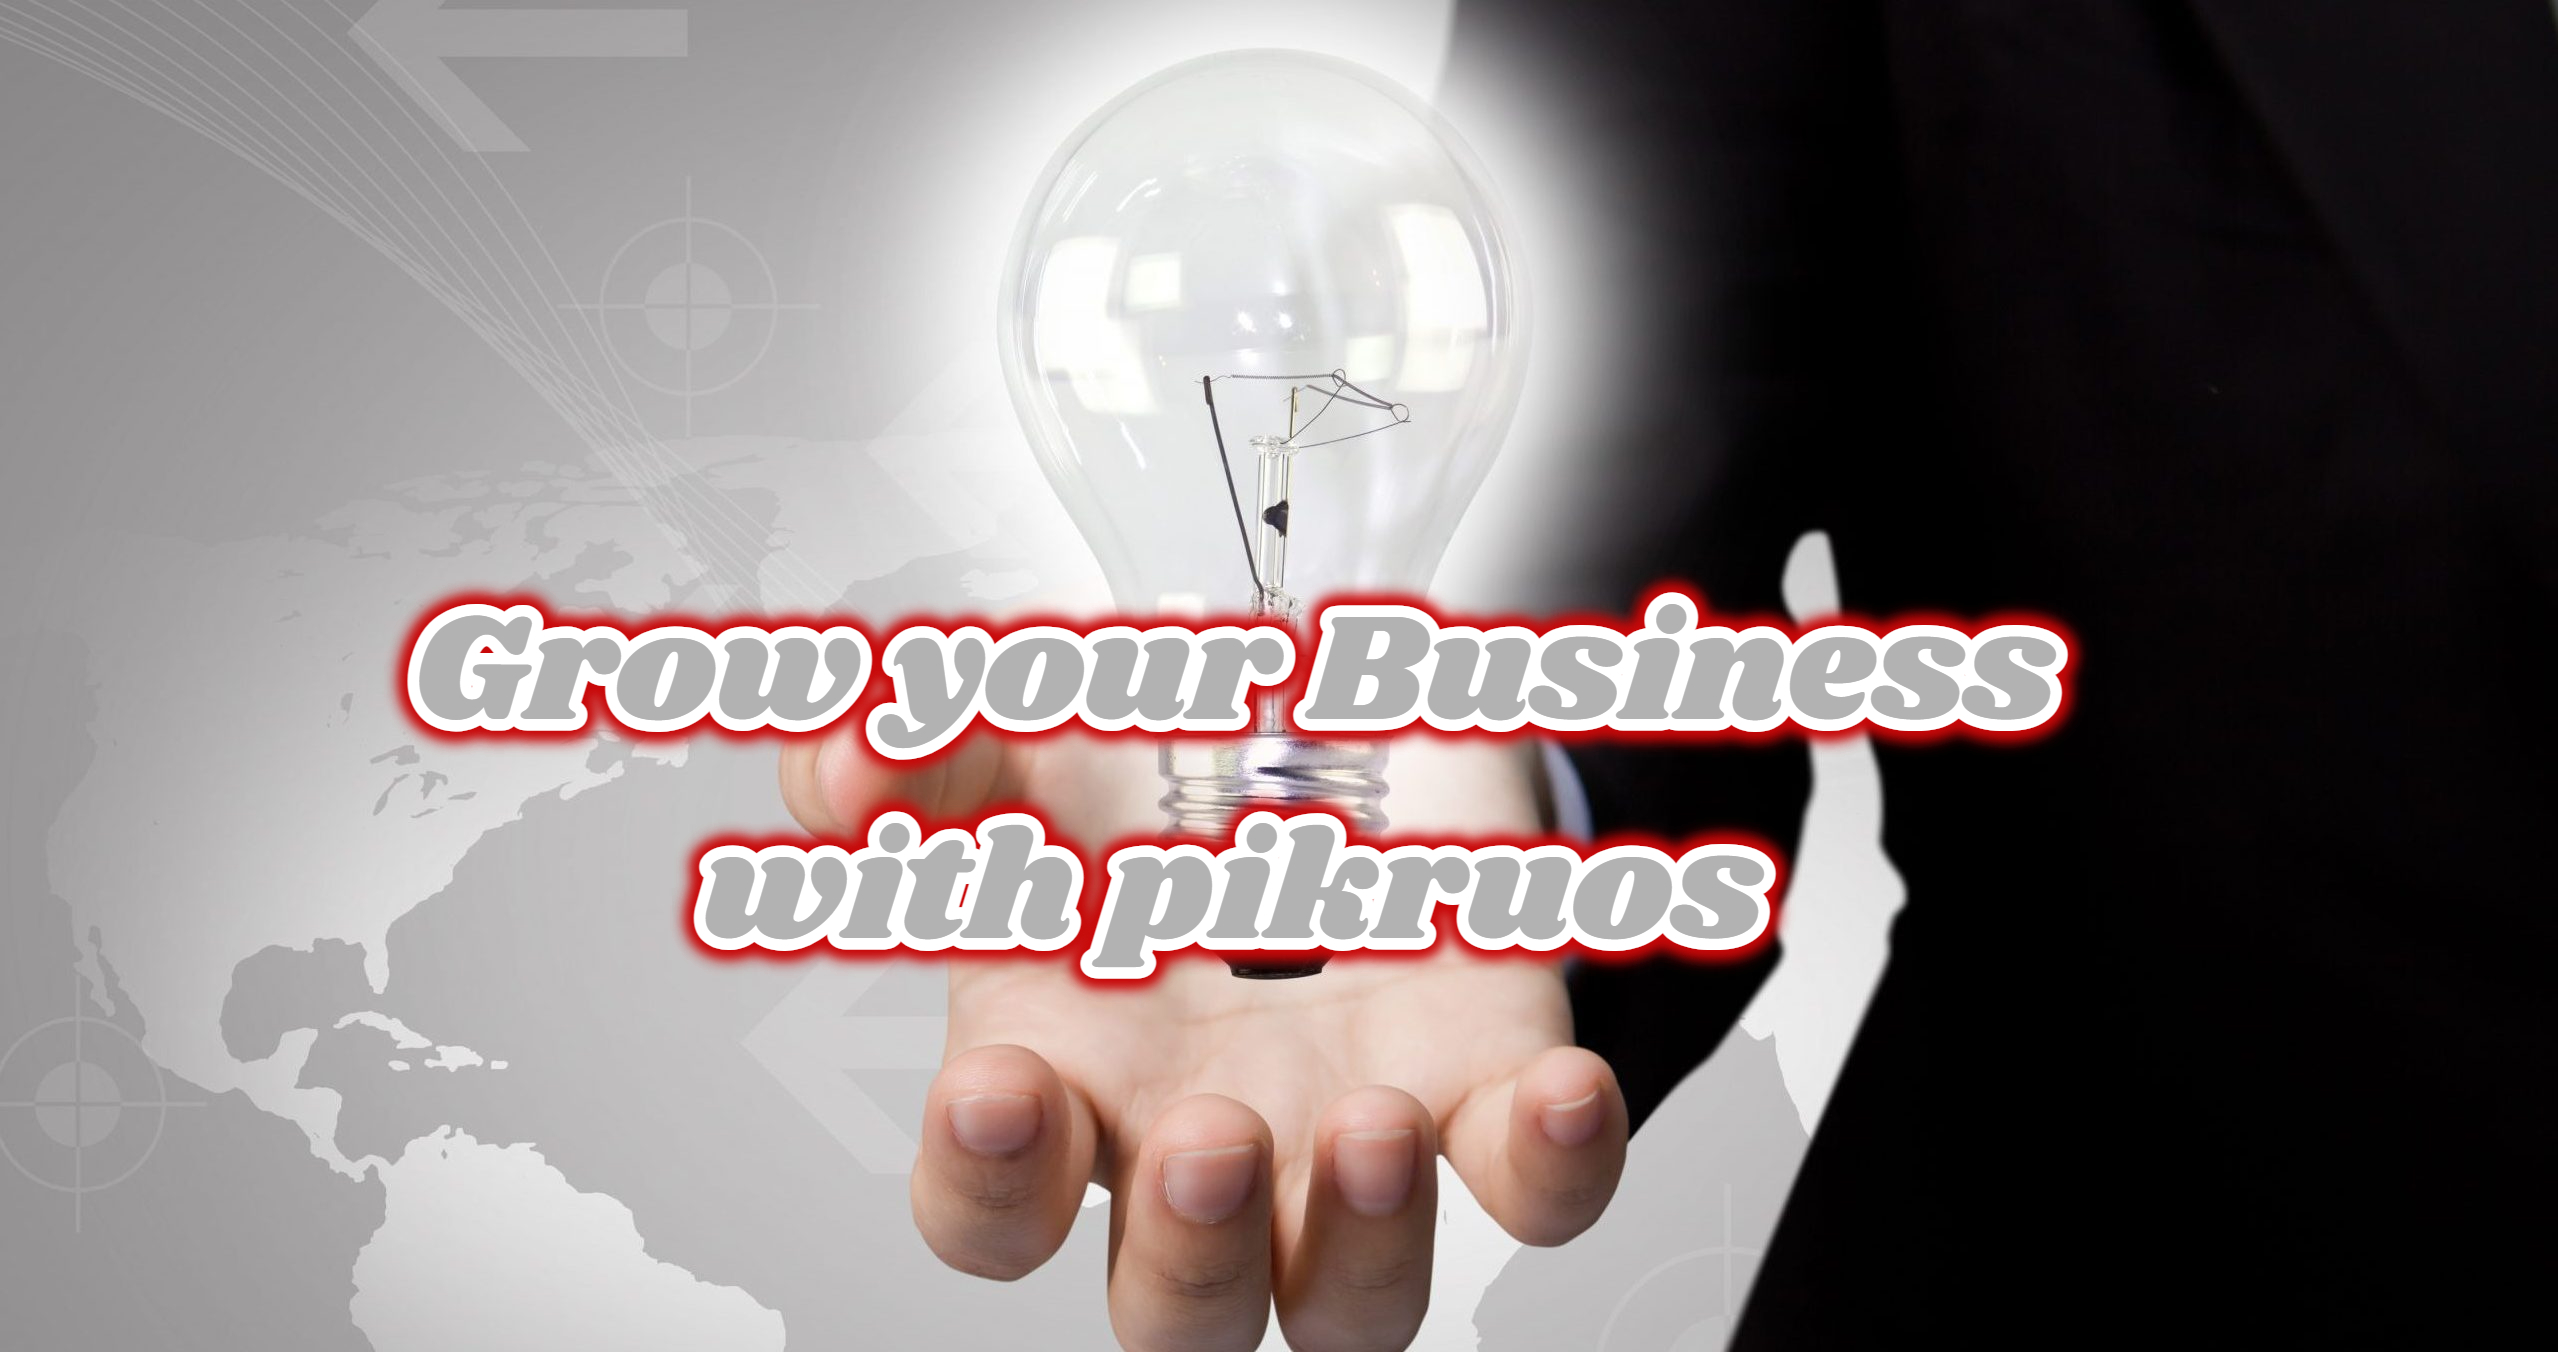 Grow your Business with pikruos